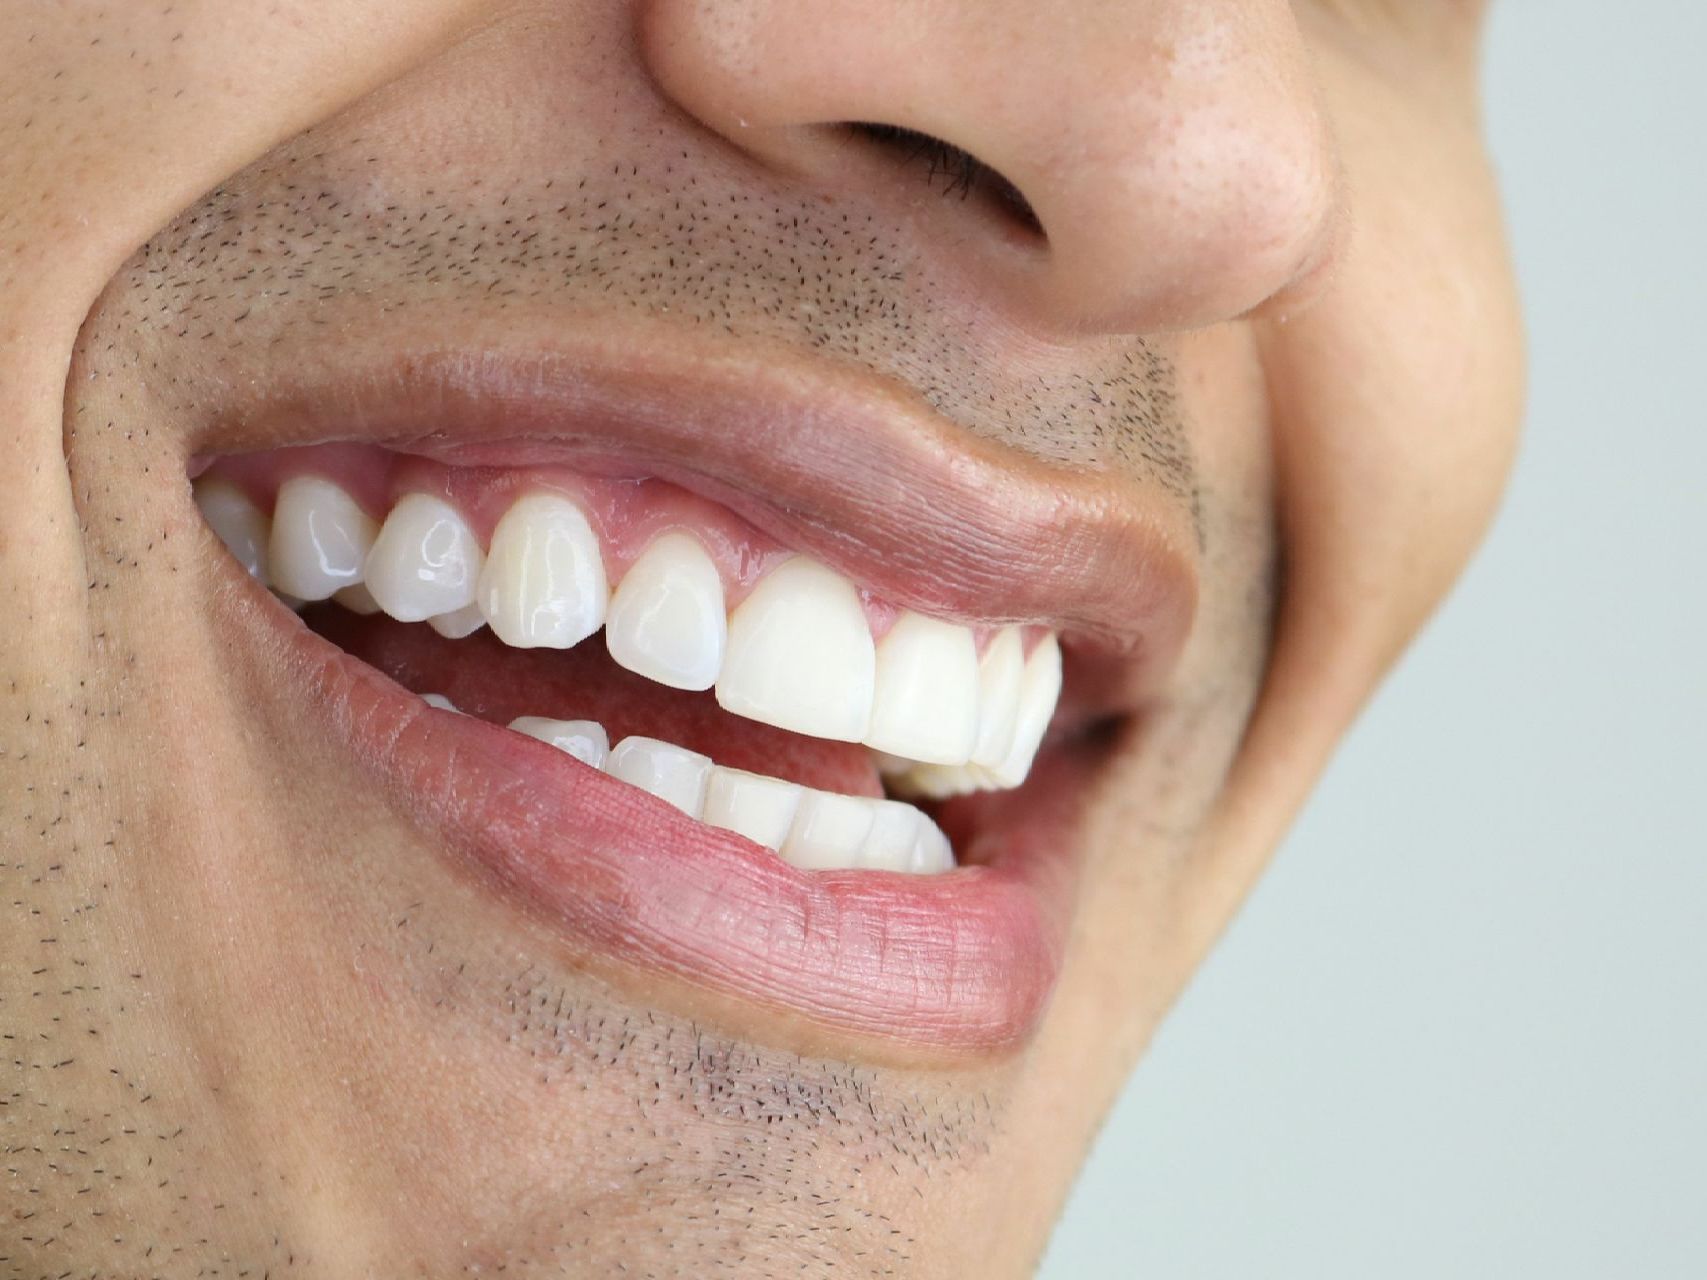 An up close image of a man's smile with straight, white teeth